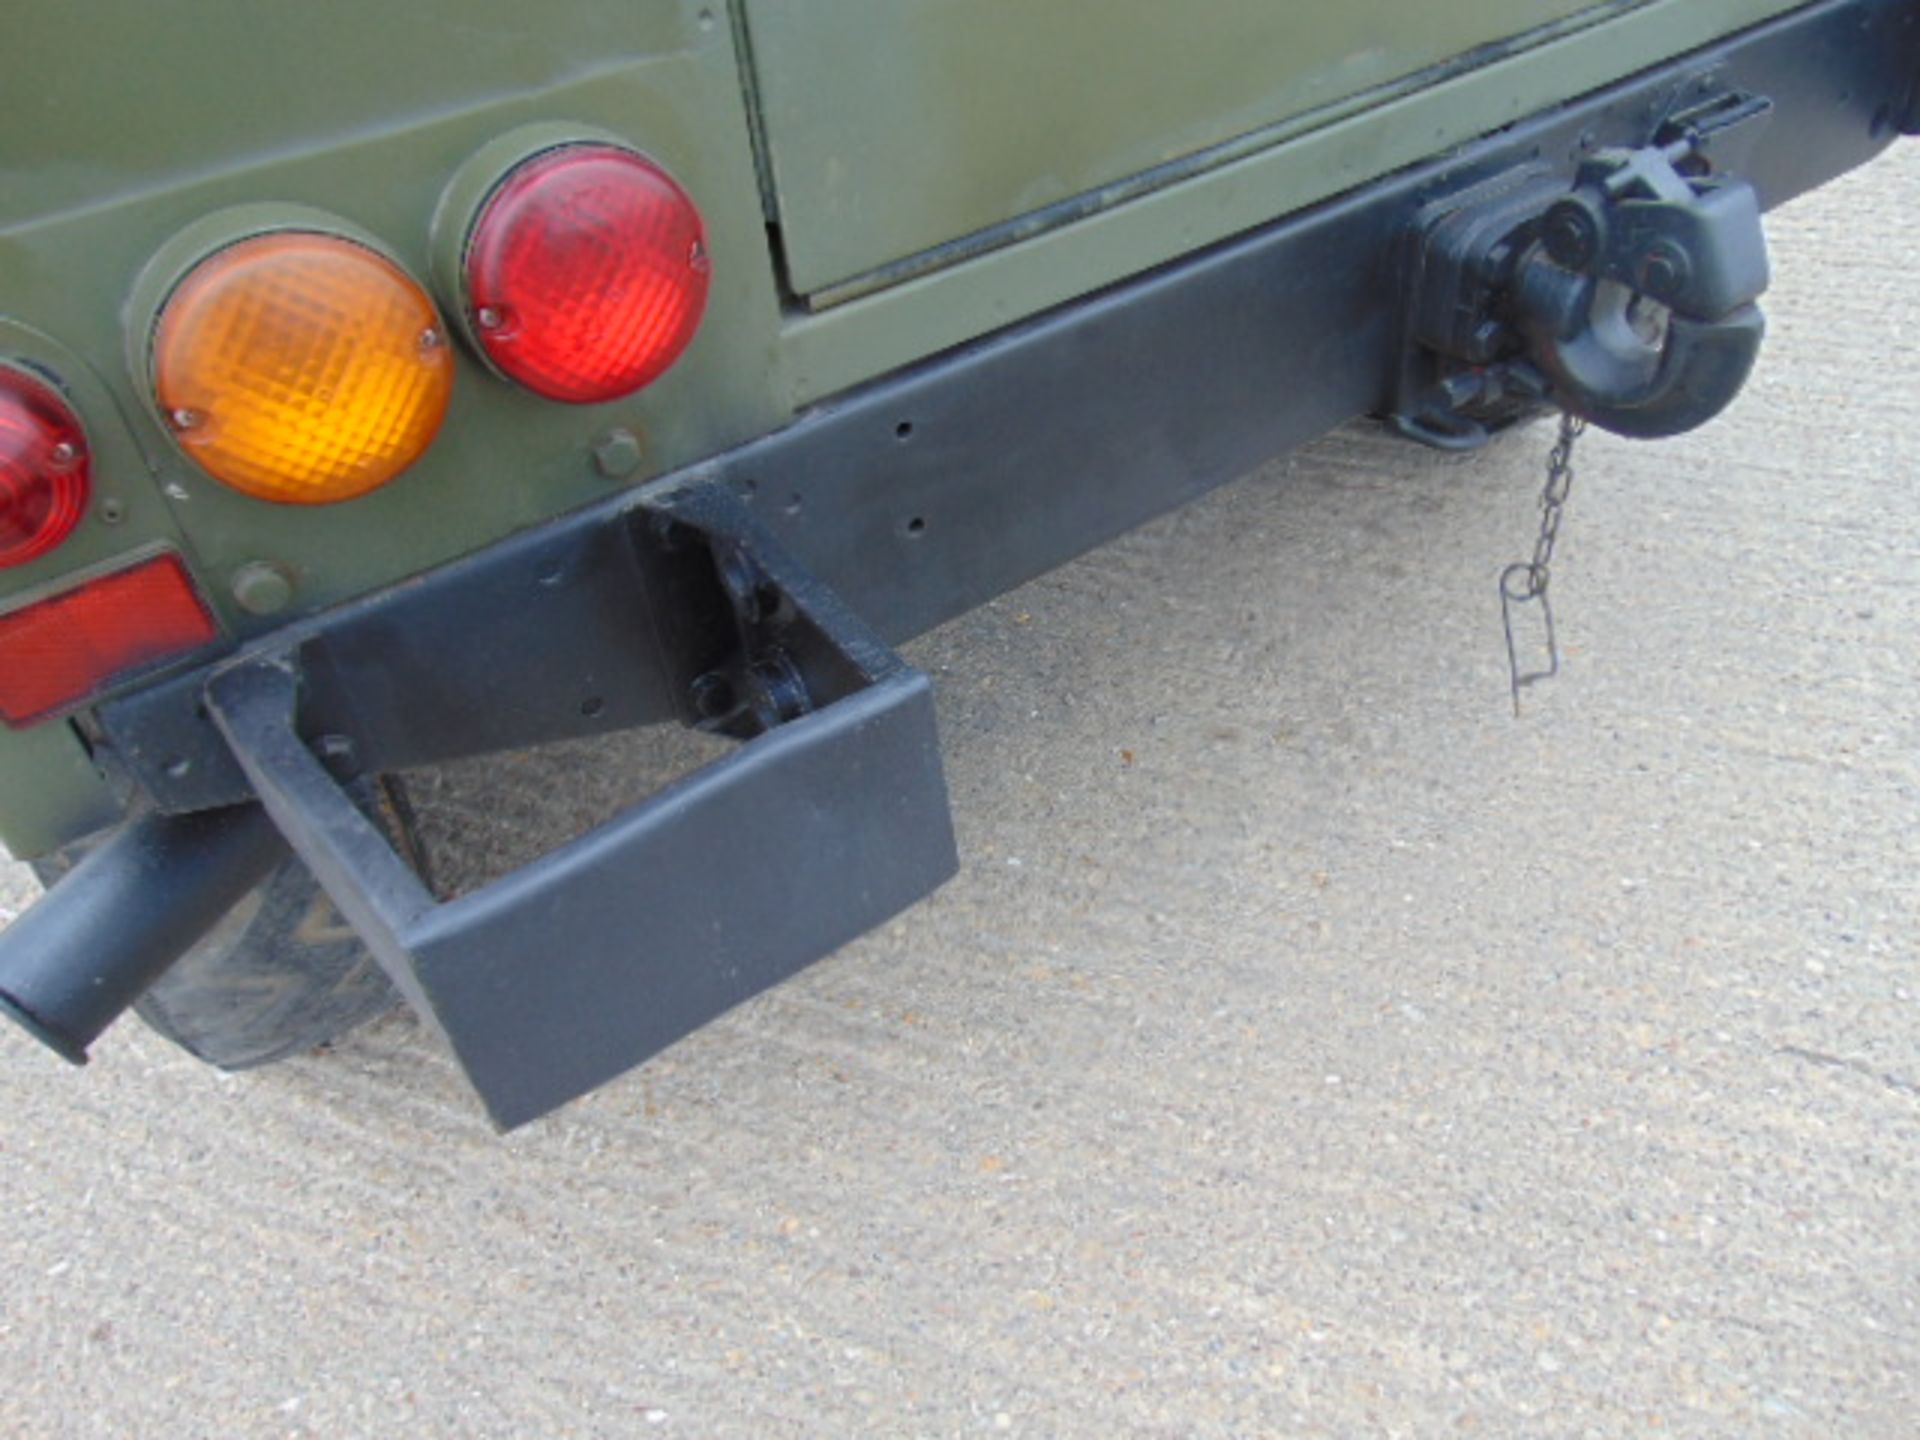 Military Specification Land Rover Wolf 90 Hard Top - Image 19 of 22